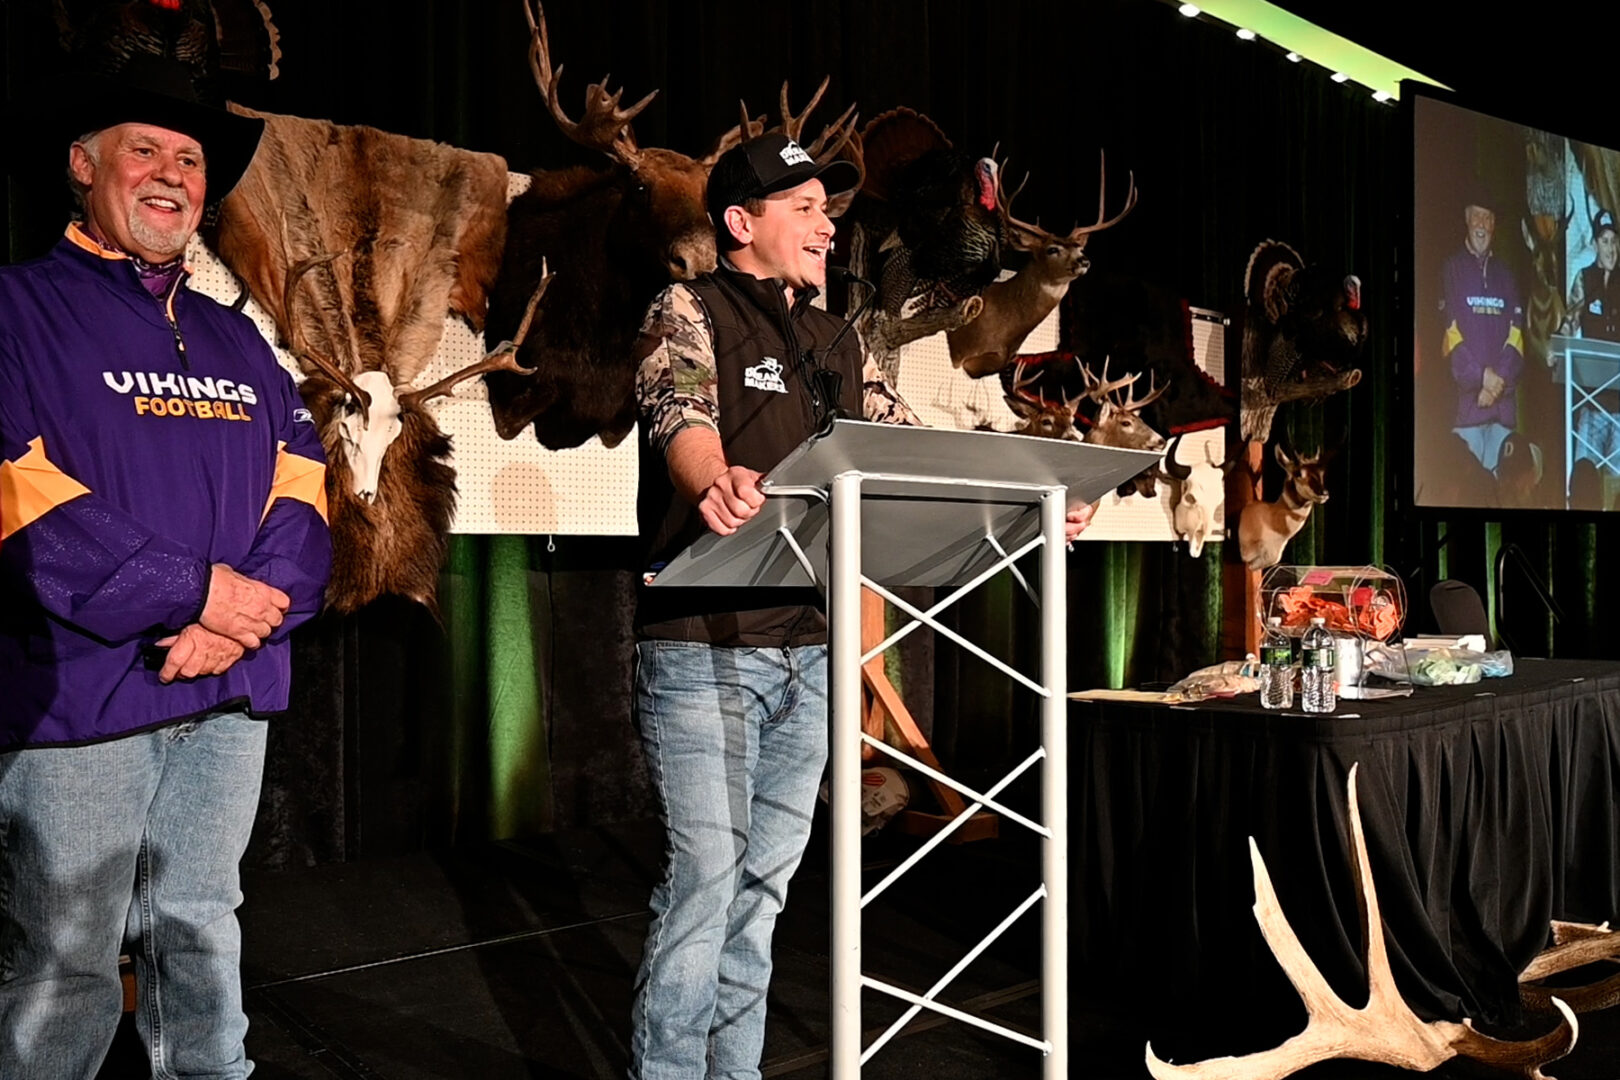 A man standing at a podium with many deer on the wall behind him.